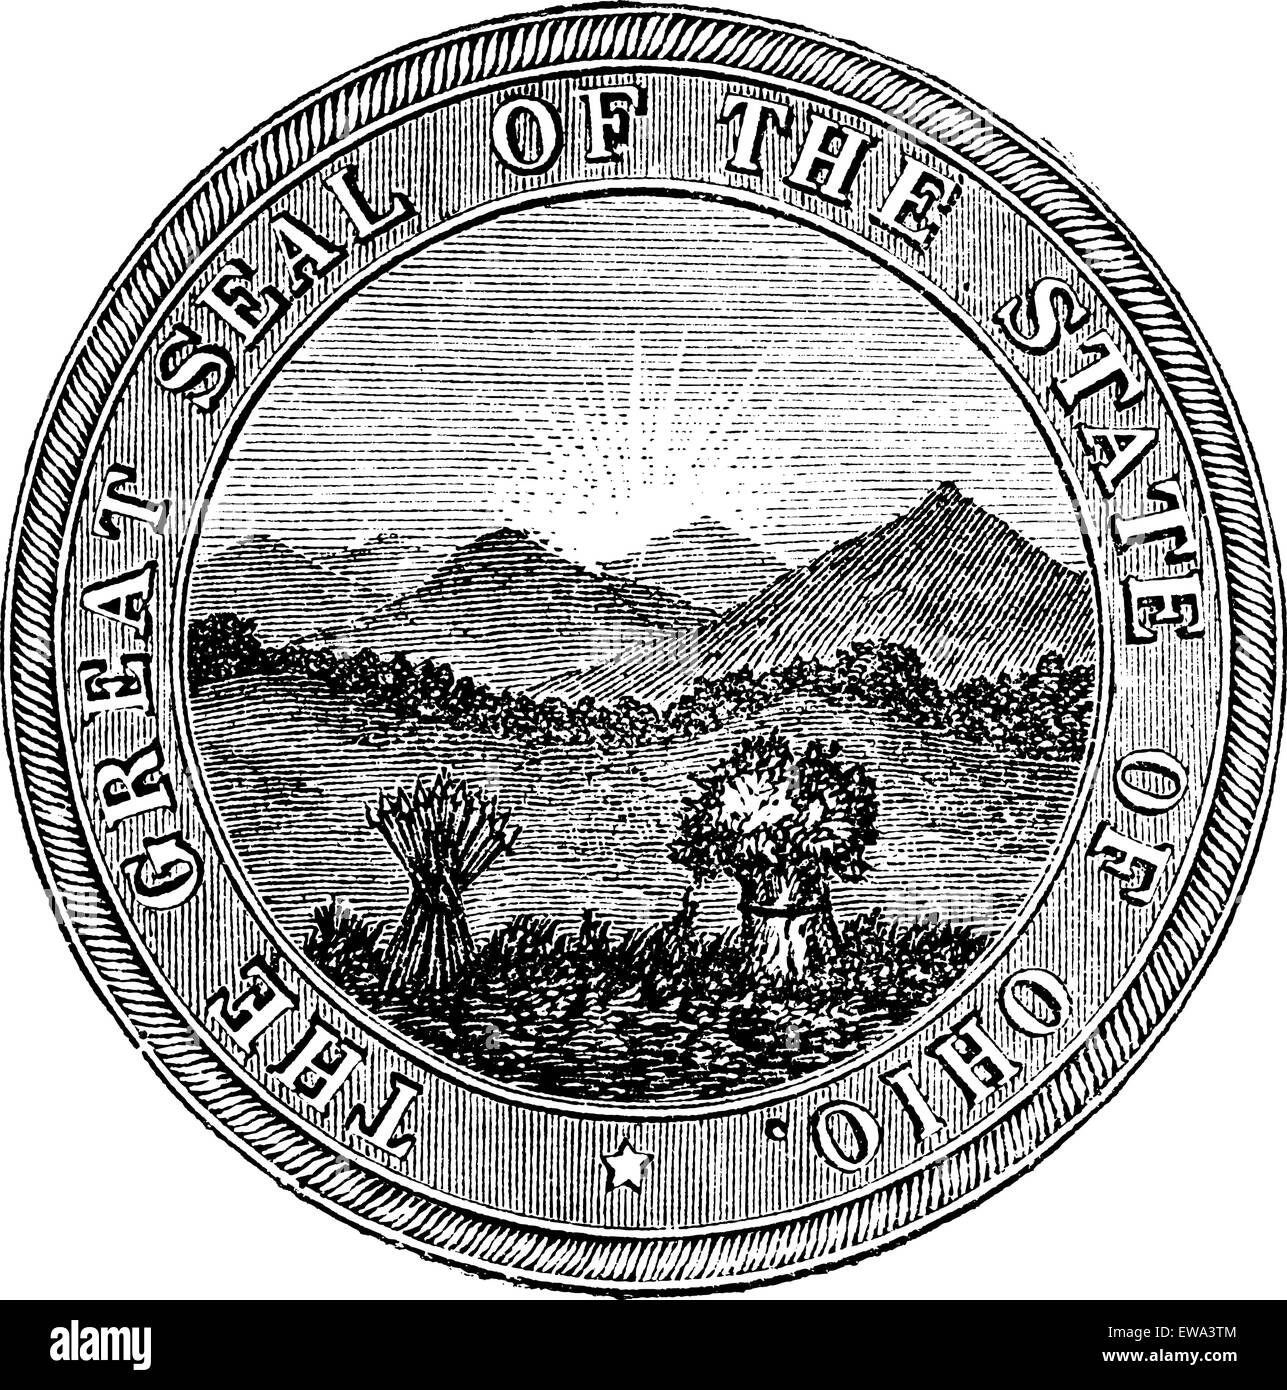 Seal of the State of Ohio, vintage engraved illustration. Trousset encyclopedia (1886 - 1891). Stock Vector